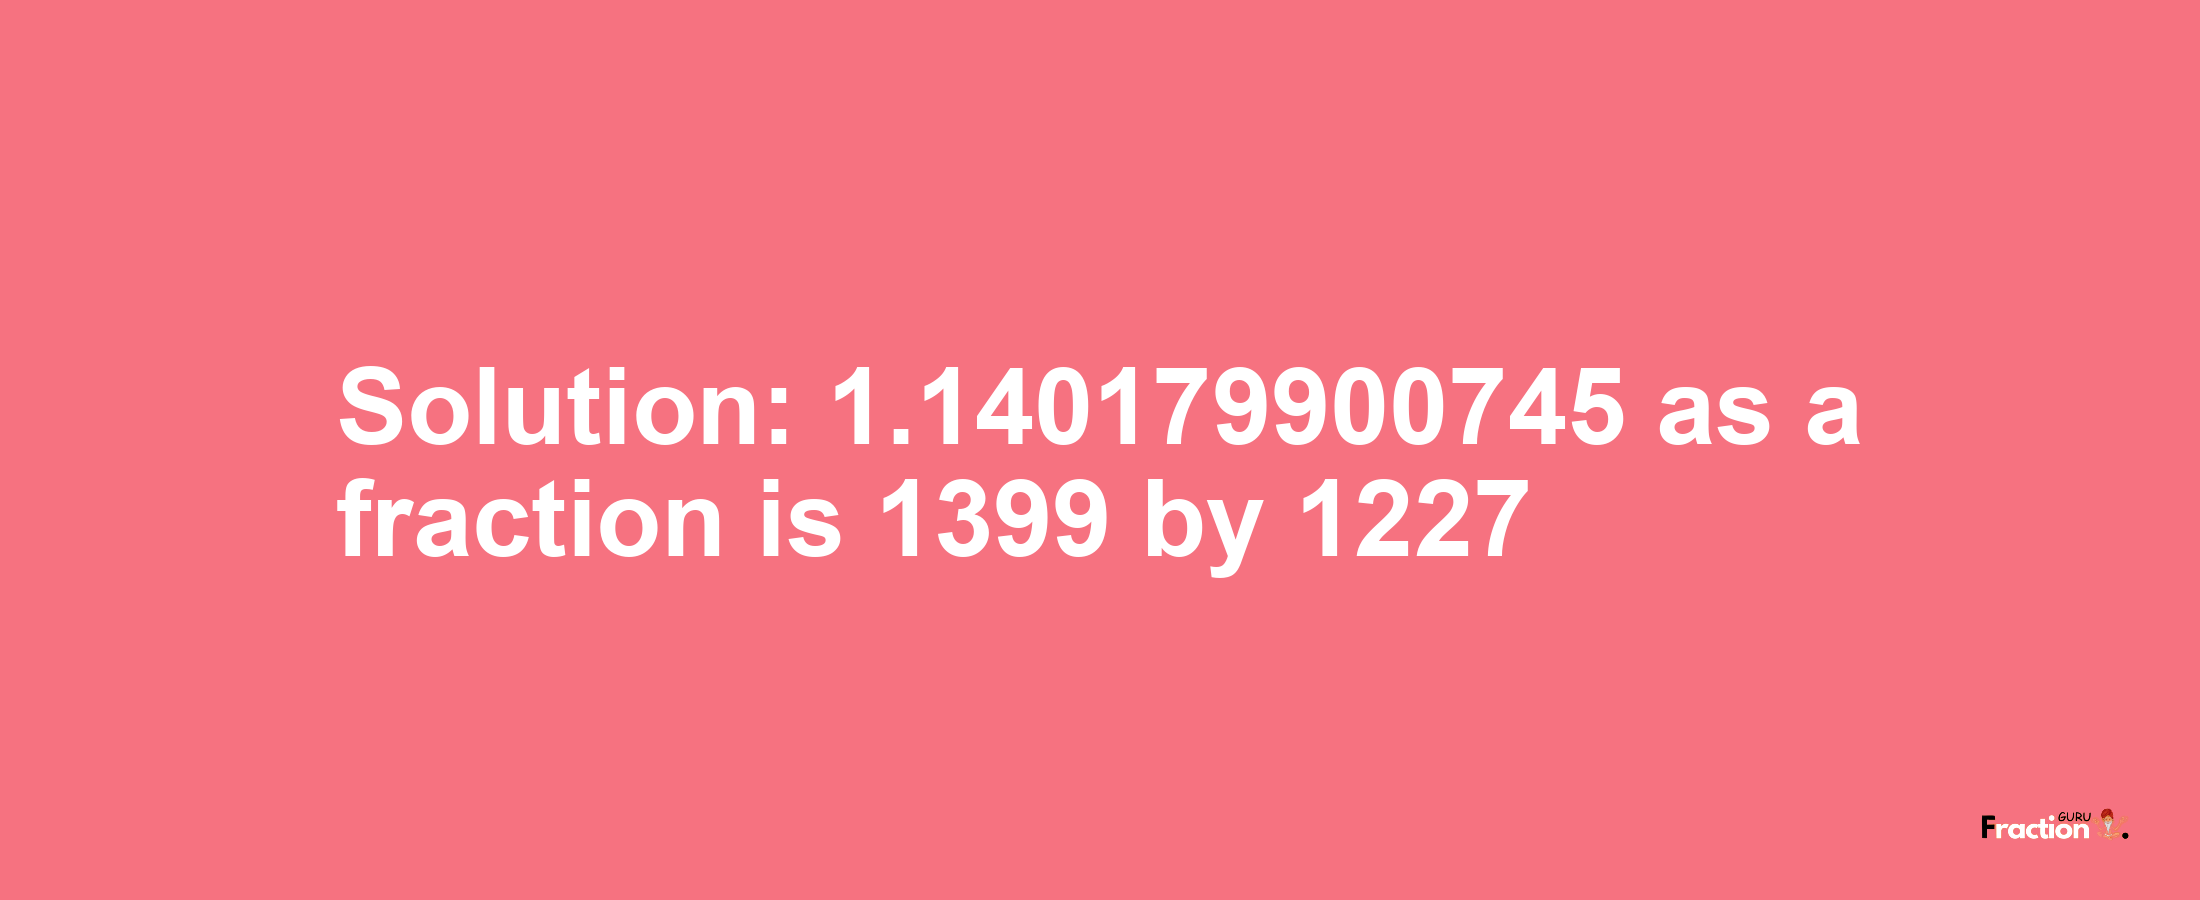 Solution:1.140179900745 as a fraction is 1399/1227